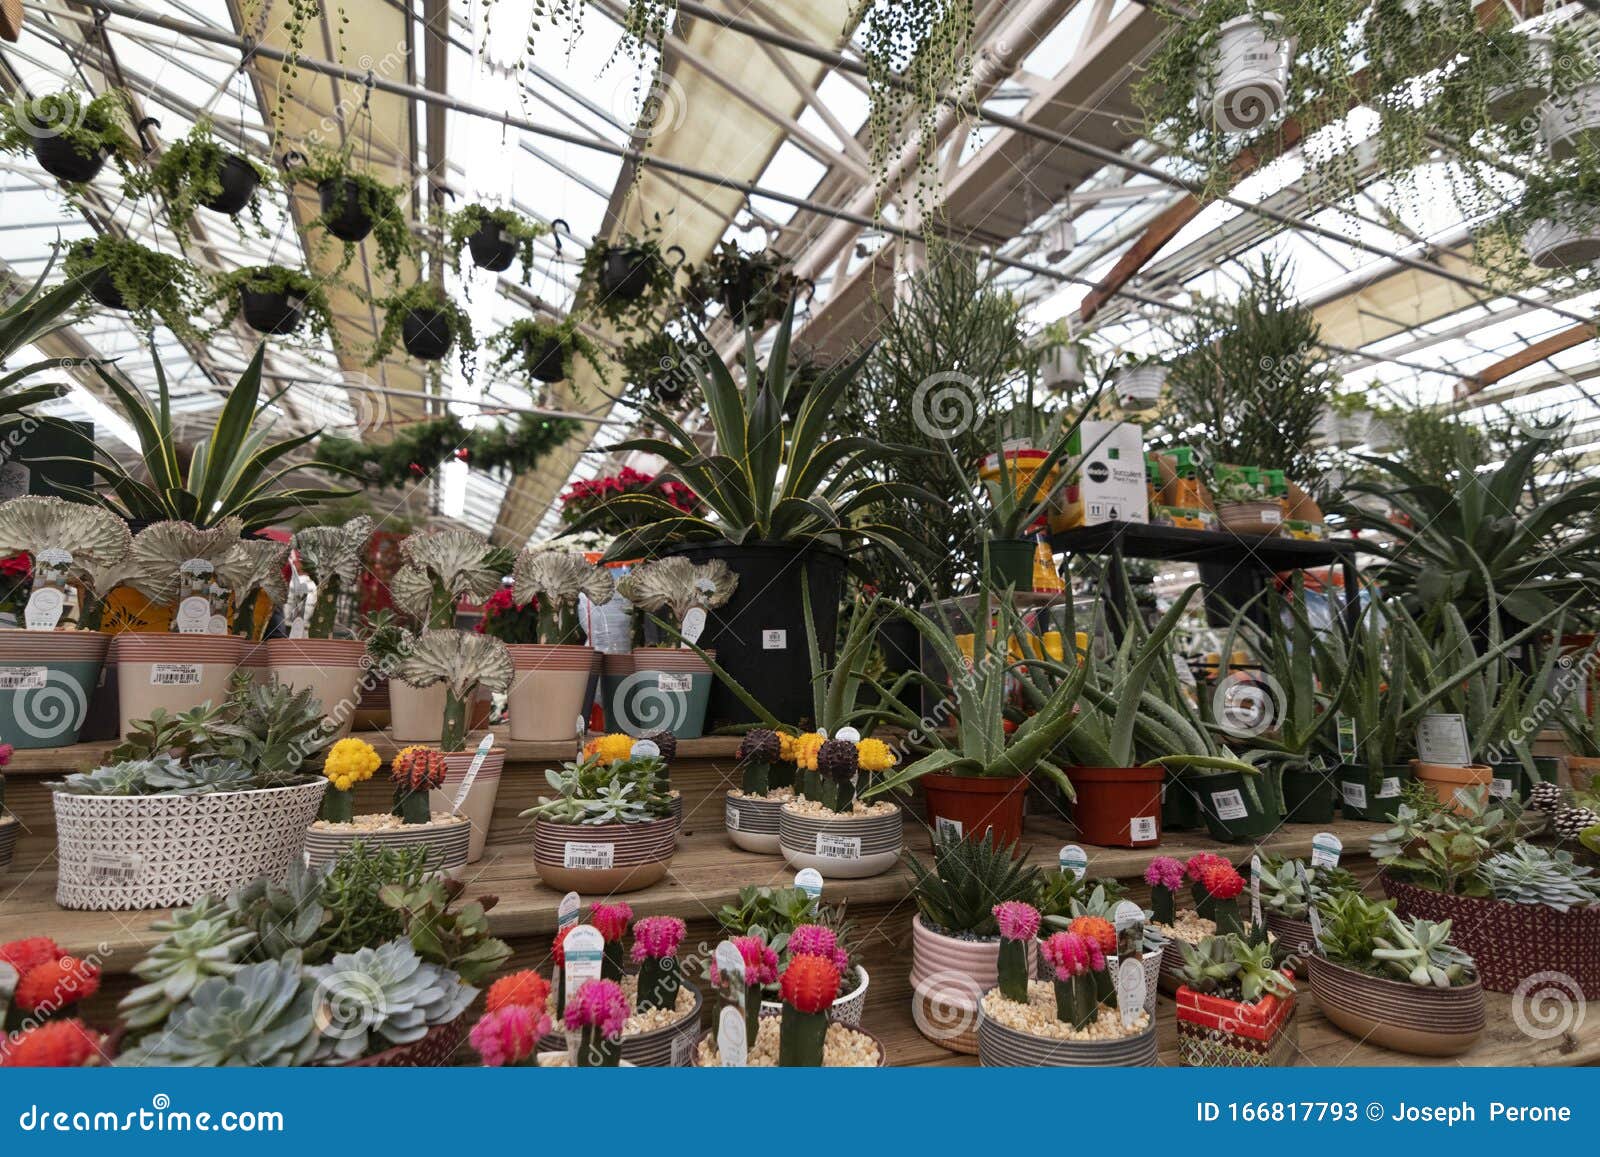 Nursery Interior, Plants for Sale Editorial Stock Photo - Image of plants,  entrance: 166817793